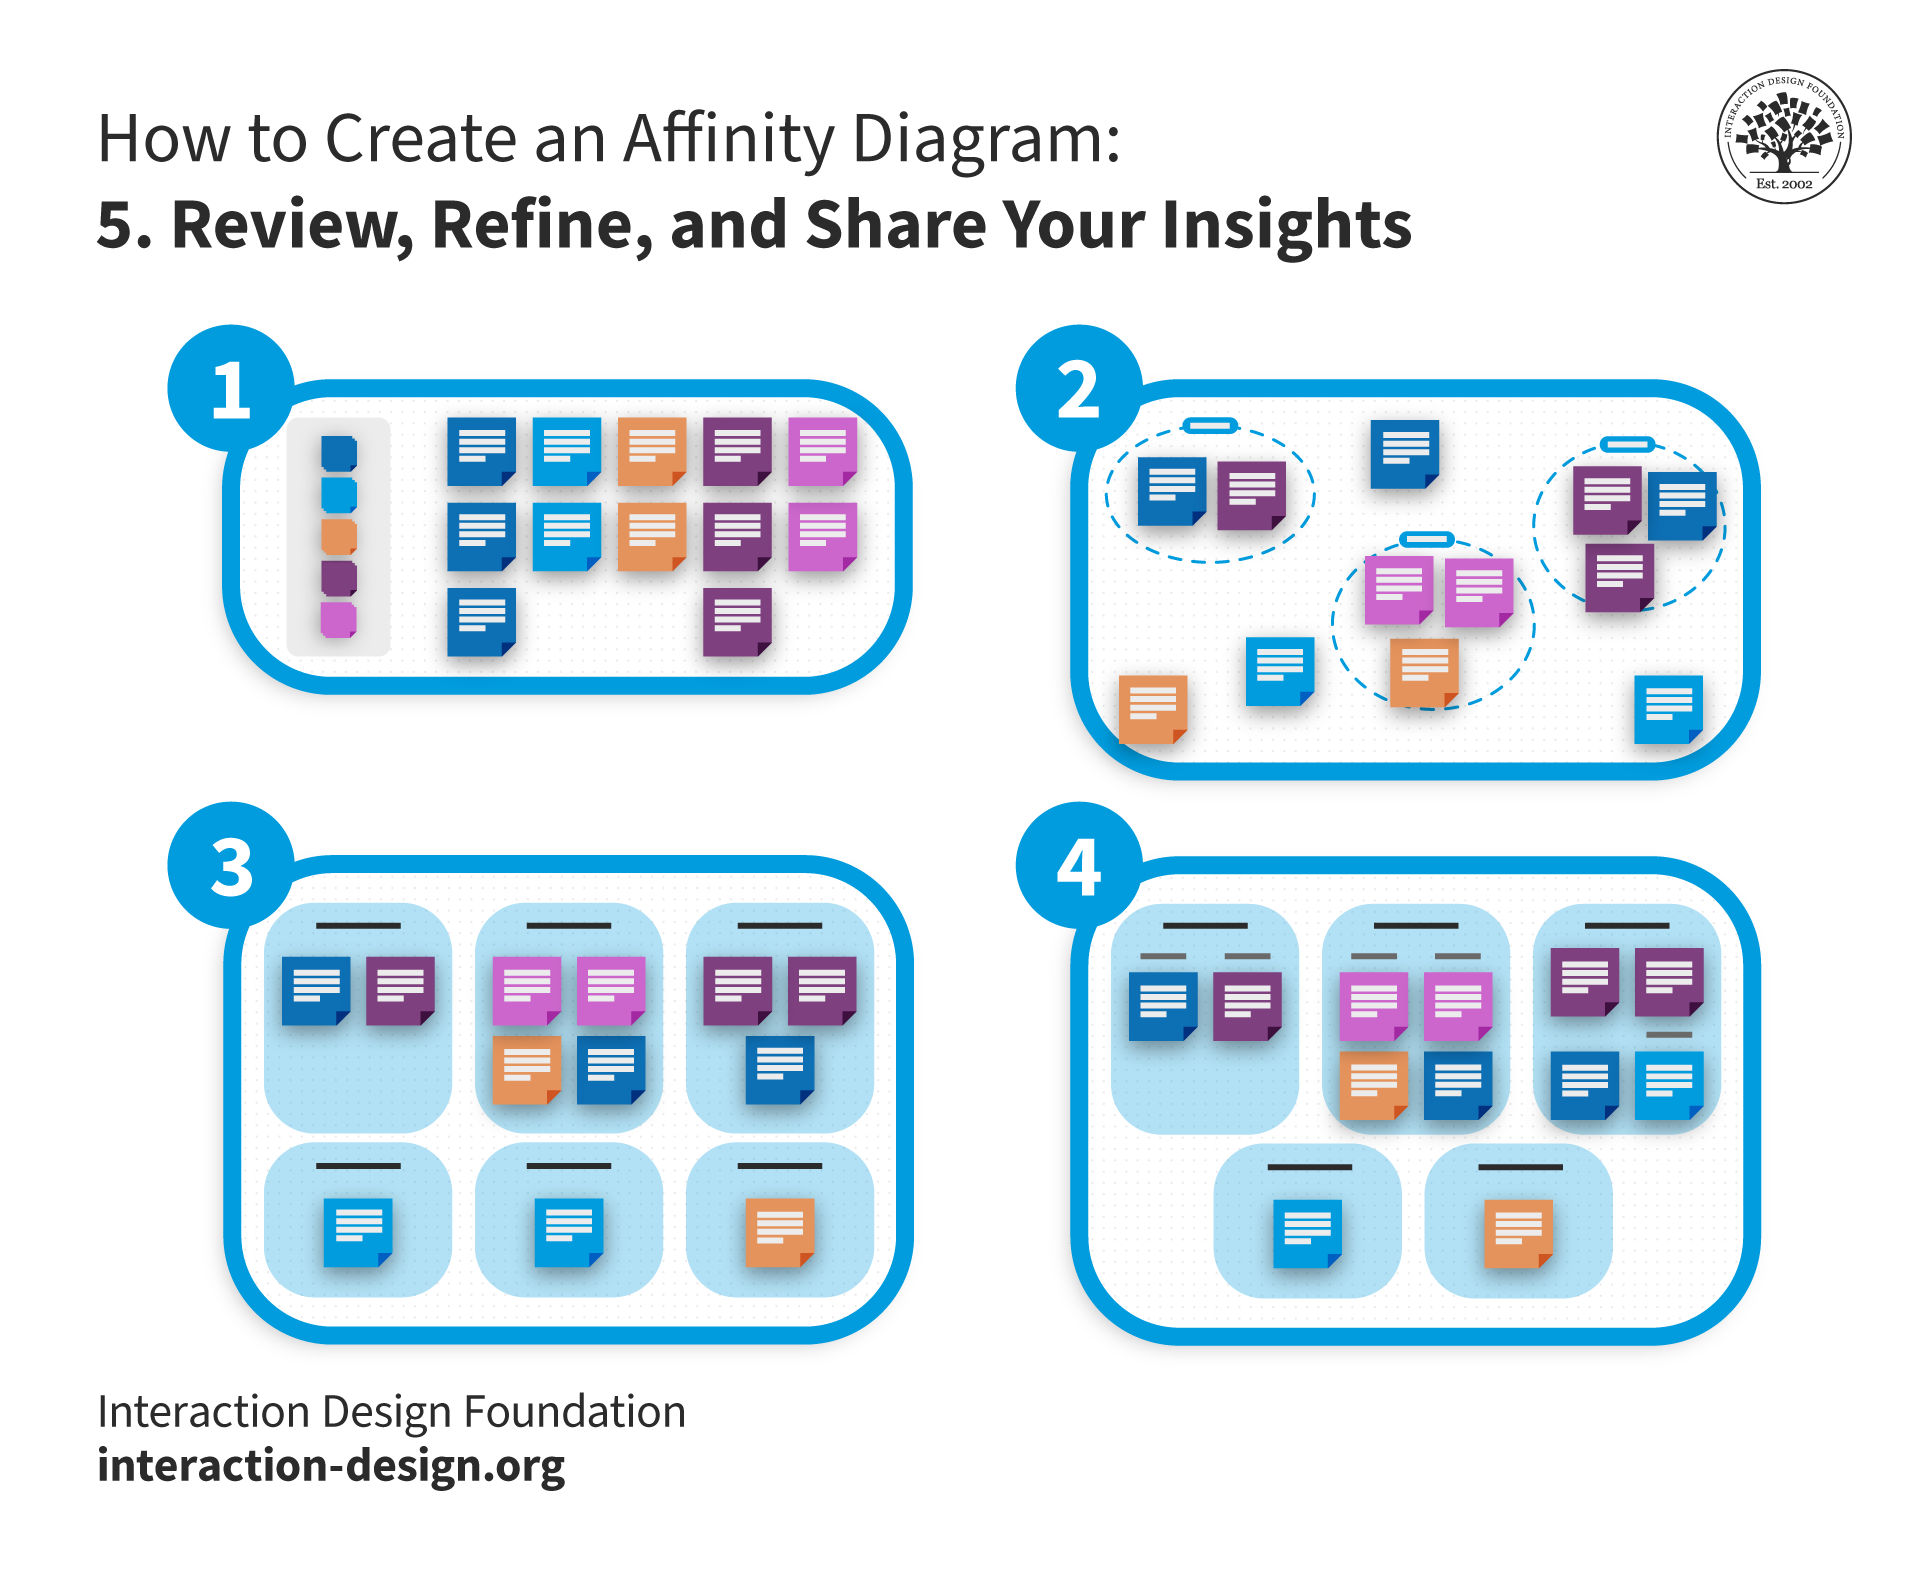 A zoomed out view of the entire affinity diagram process from Step 1: Gather to Step 4: Create Hierarchy.